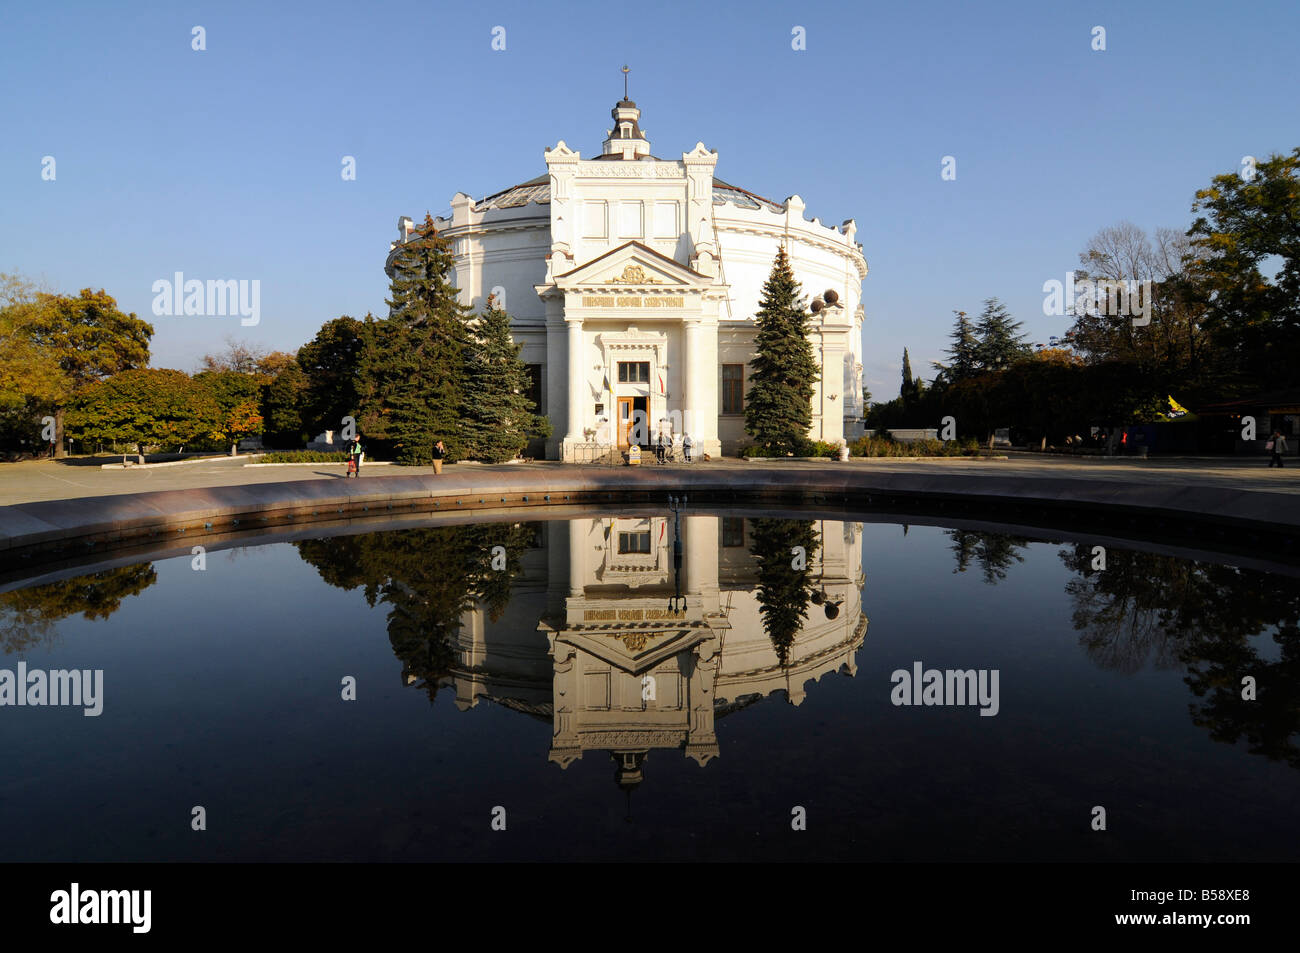 The 'panorama' building in Sebastopol, Ukraine. This building host a large museum dedicated to the XIX century Crimean War. Stock Photo